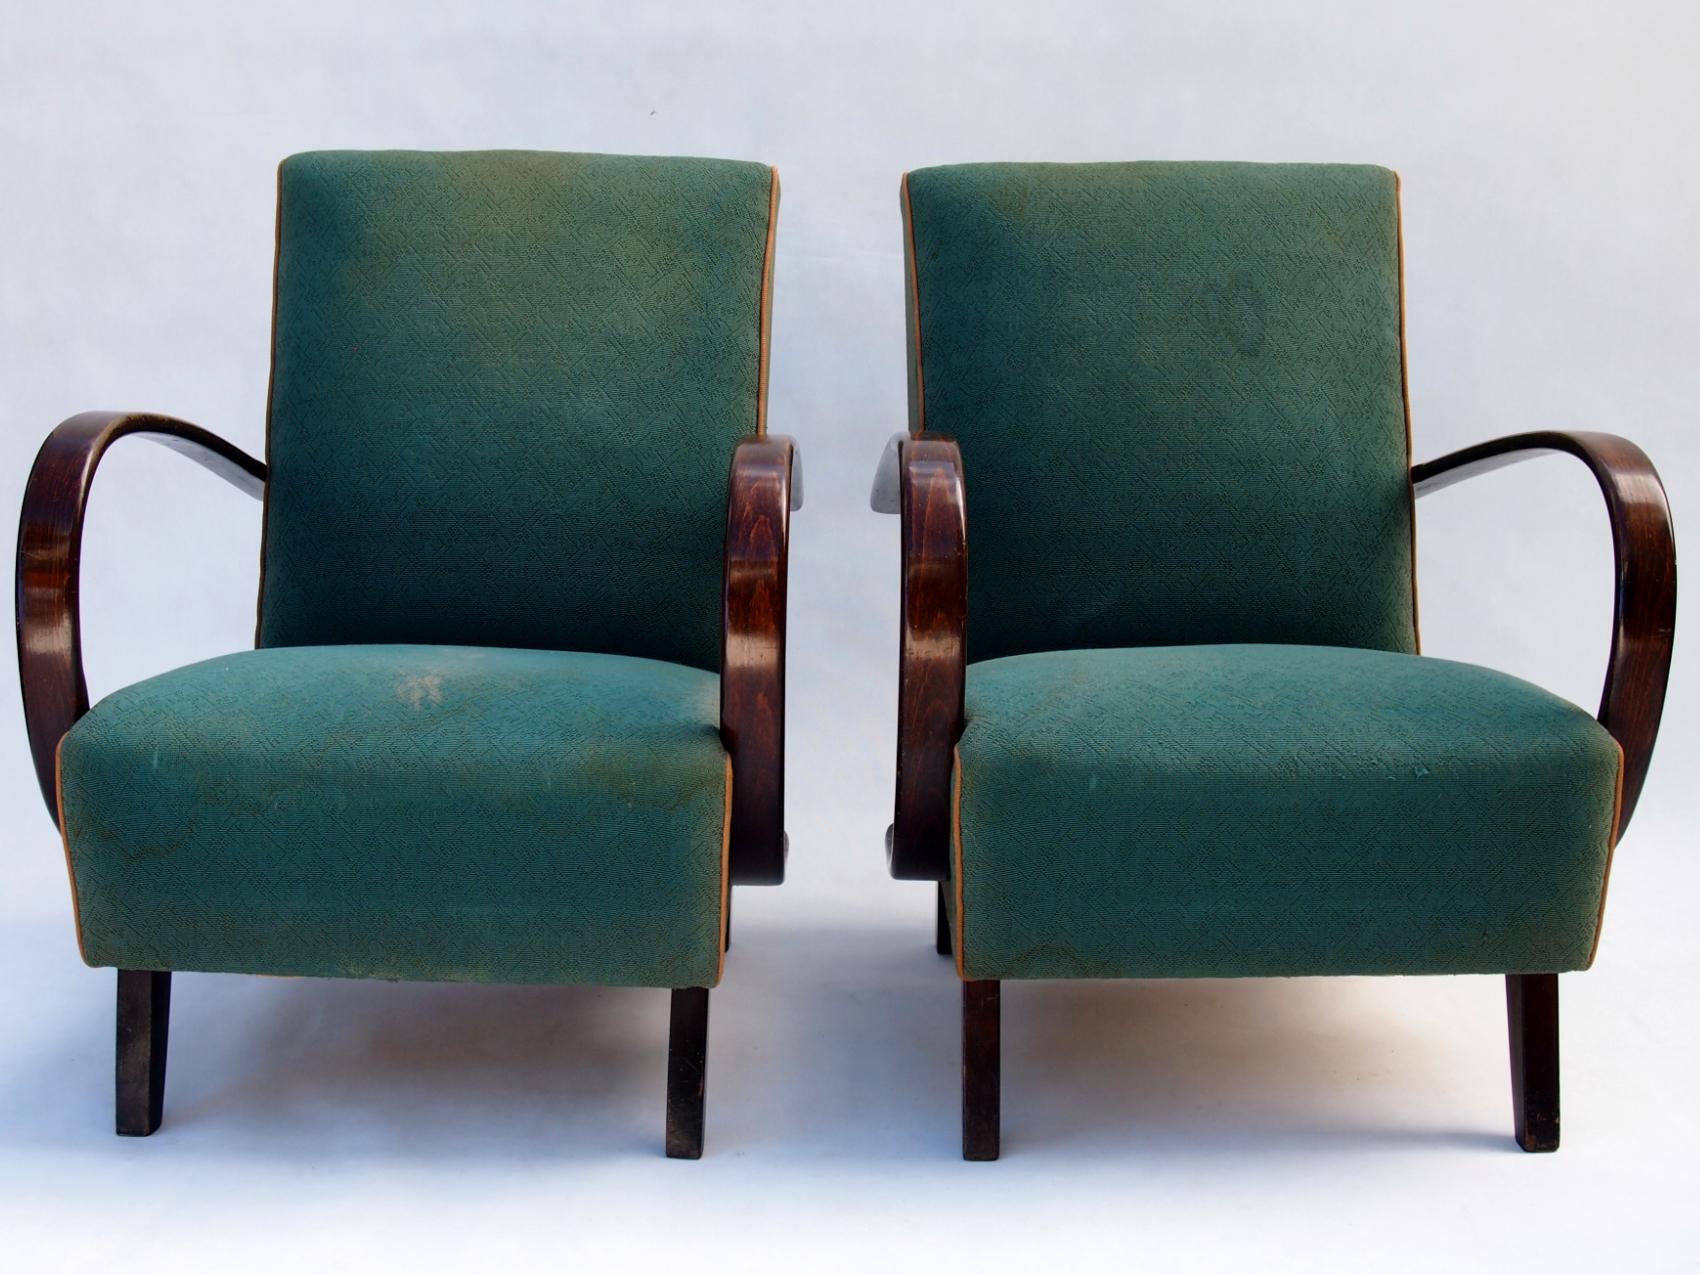 This lounge chairs, model No. 2, were designed by Jindrich Halabala and produced in former Czechoslovakia in the 1930s by UP Zavody Brno. The chairs features curved armrests and legs made from stained beech and are upholstered in original fabric.